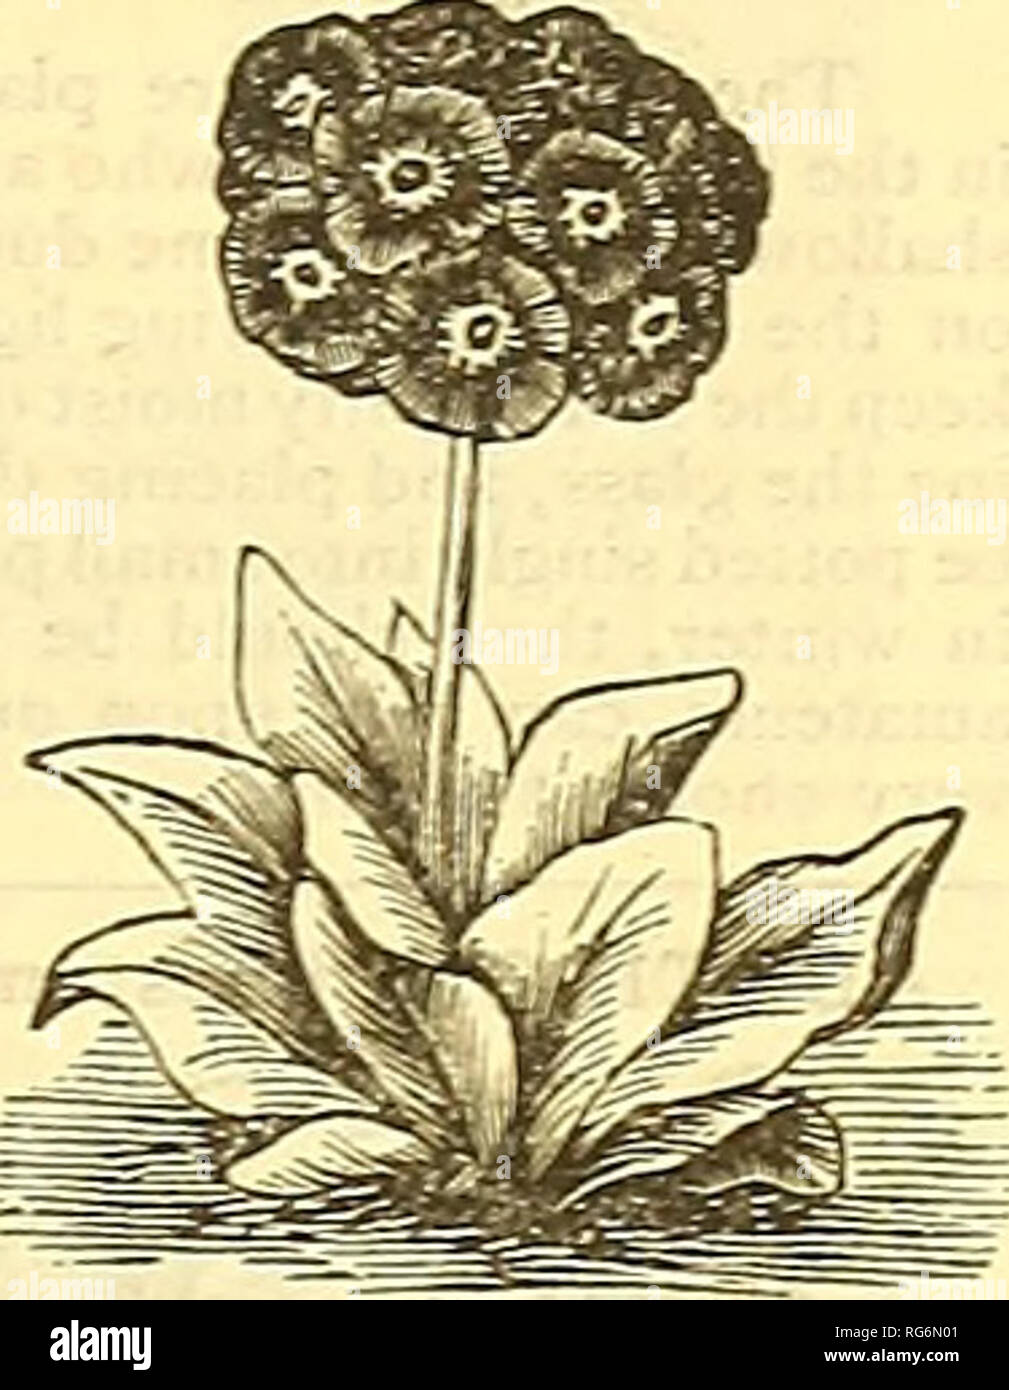 . Burpee's farm annual, 1887 : garden, farm, and flower seeds. Nursery stock Pennsylvania Philadelphia Catalogs; Flowers Catalogs; Vegetables Catalogs; Seeds Catalogs. PHLOX, PERENNIAL. Choicest Mixed, embracing the newest and best varie- ties. Clumps of these are gorgeous with brilliant flowers and must be seen to be appreciated. They are best sown in the fall. lo cts, PRIMULA. Primula auricula, fine mixed. 25 cts. Elatior Polyanthus, choice mixed. 10 cts. Vulgaris, the common wild English Primrose. 10cts. PYRETHRUM. Parthenium, flore-pleno, the double Feverfew, lo cts. Parthenifoliuin aureum Stock Photo